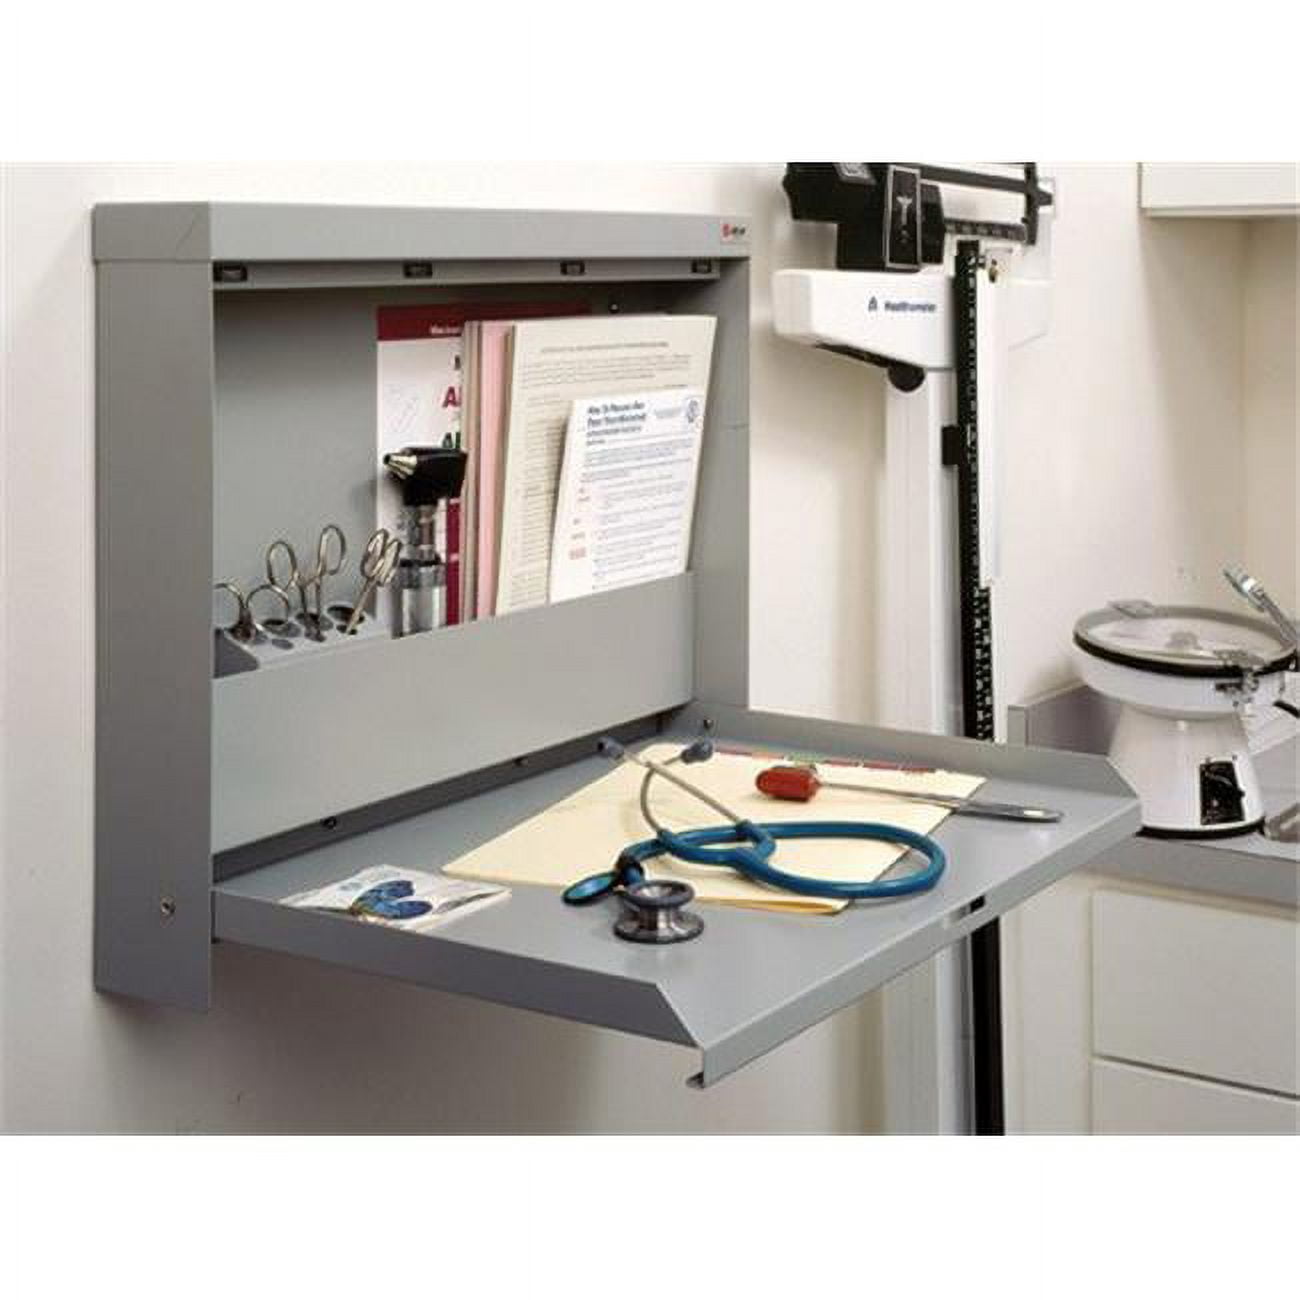 Picture of Datum Storage WW-100LT-H Locking Wall Write Mounted Desk with Hasp Lock for Padlock